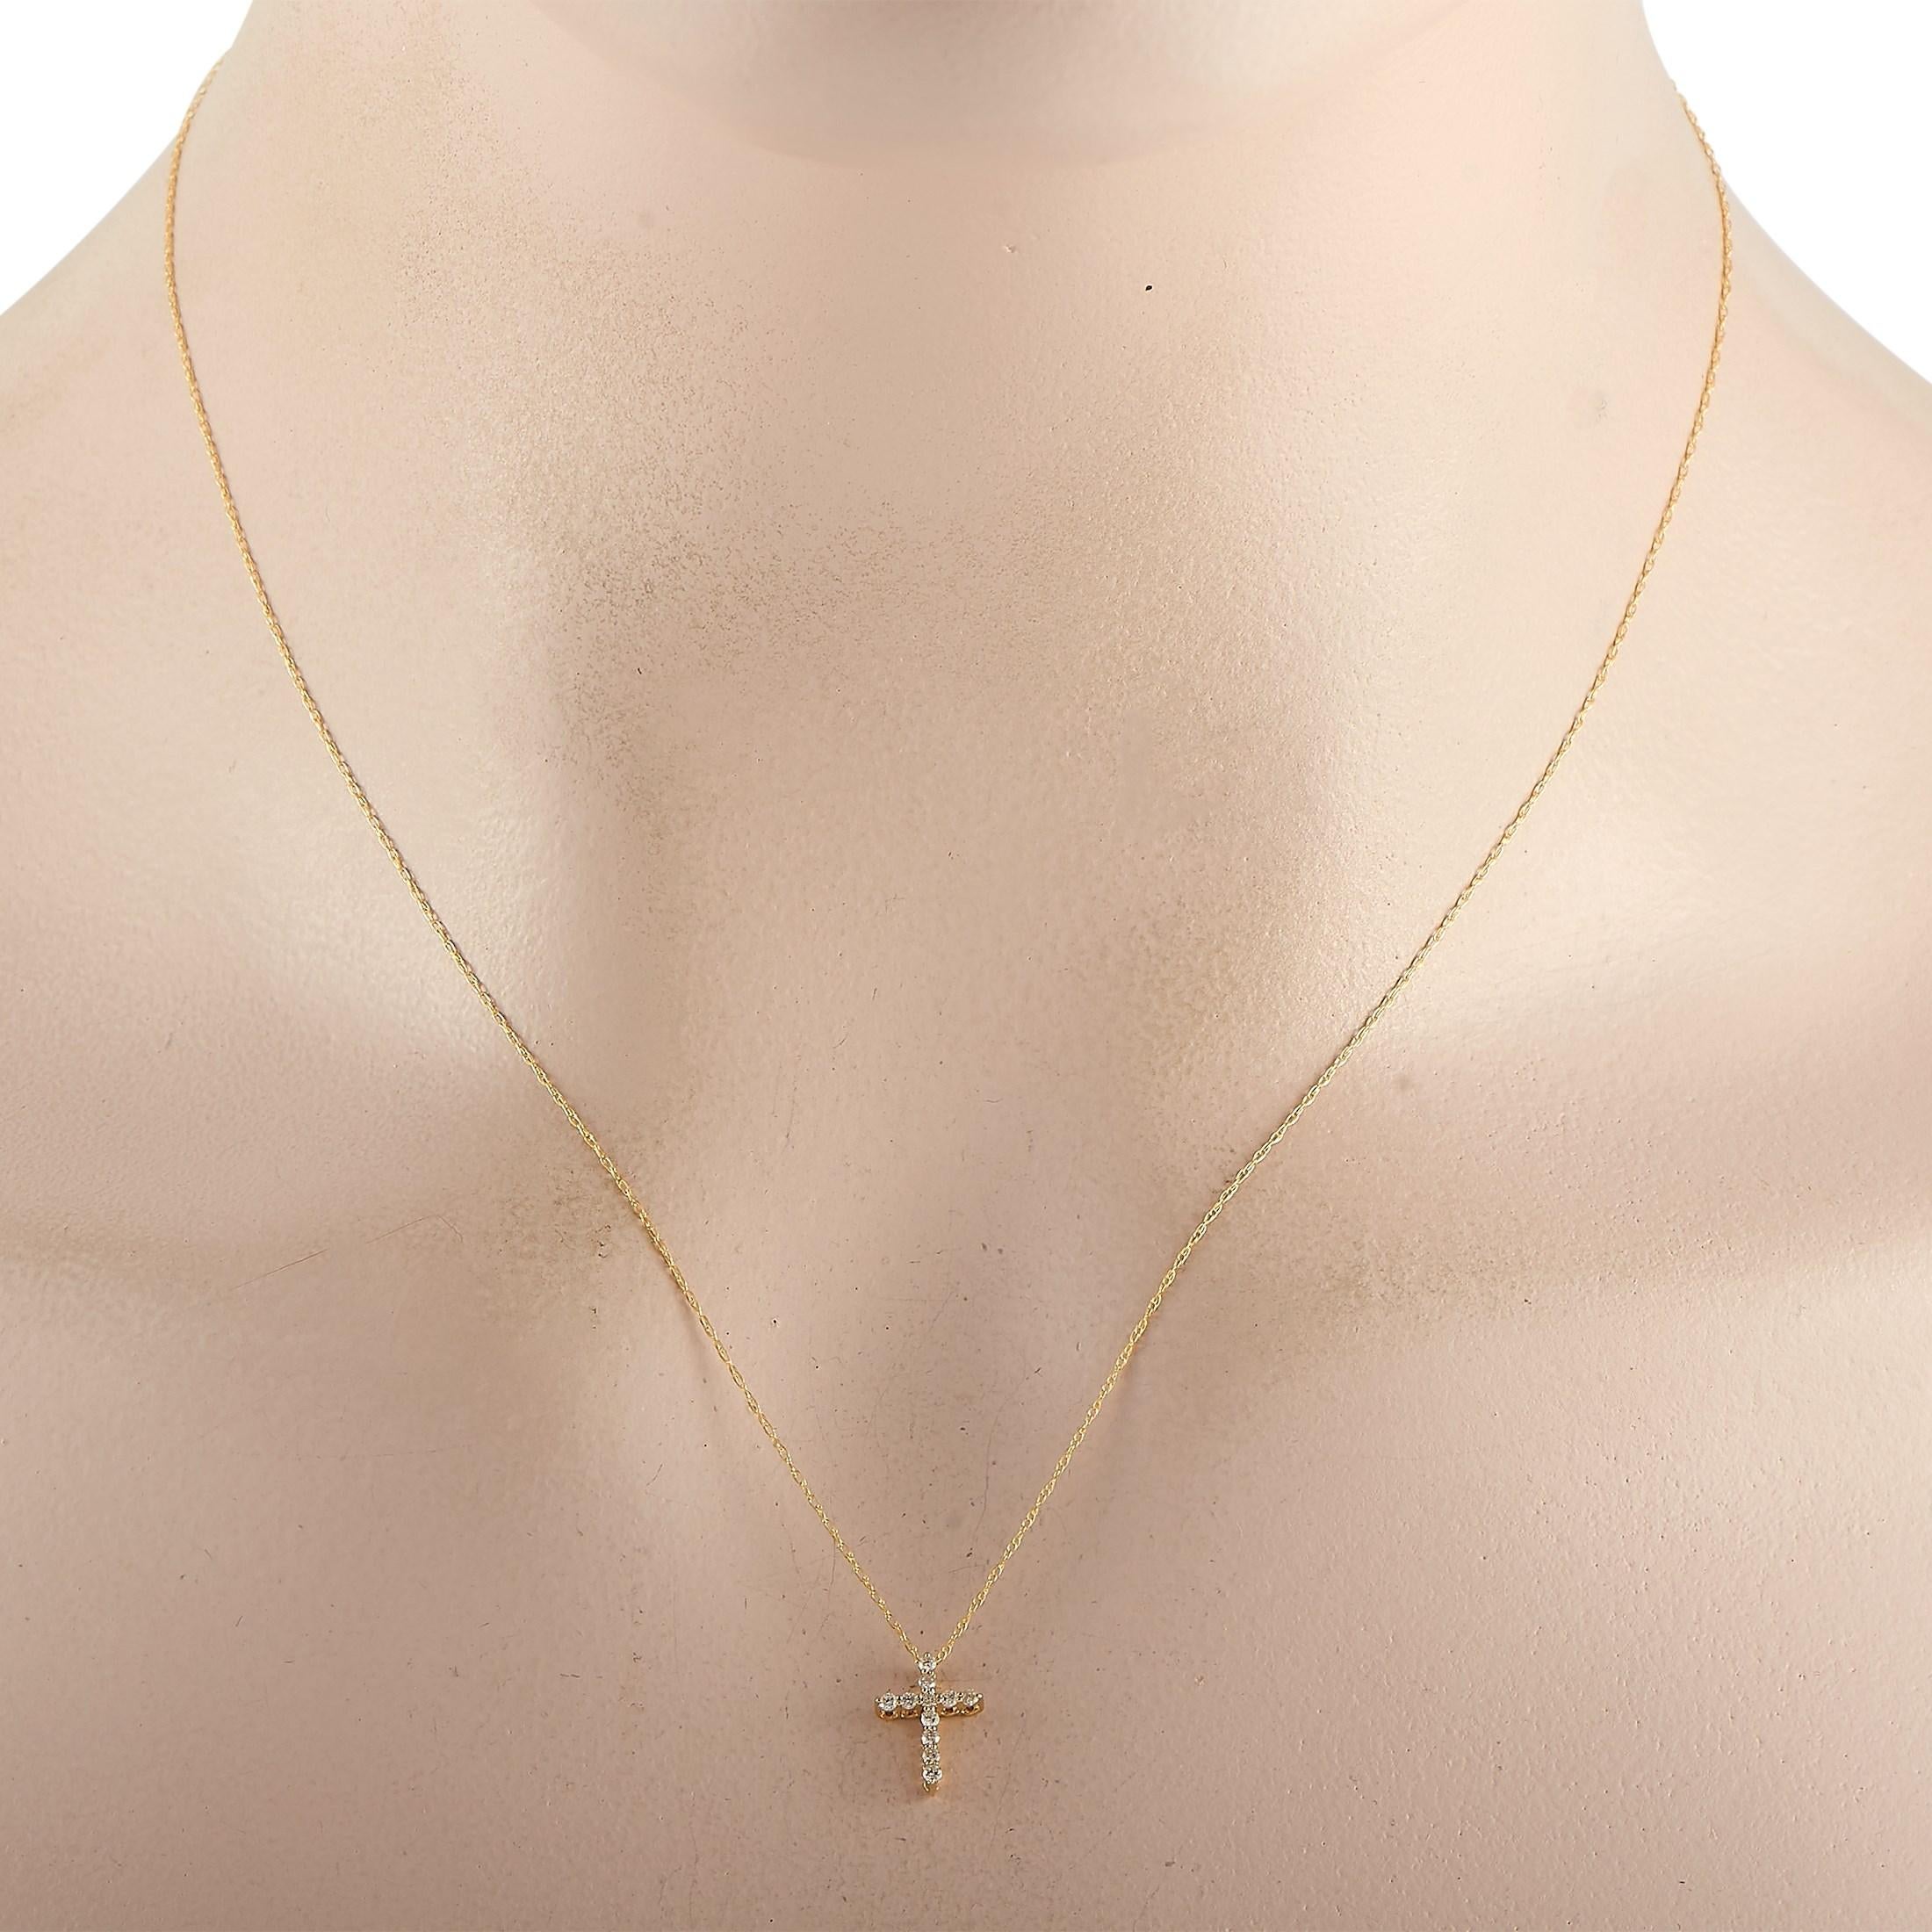 This LB Exclusive 14K Yellow Gold 0.10 ct Diamond Cross Pendant Necklace features a delicate 14K Yellow Gold chain measuring 18 inches in length. The necklace features a matching 14K yellow gold pendant set with 0.10 carats of round-cut diamonds.